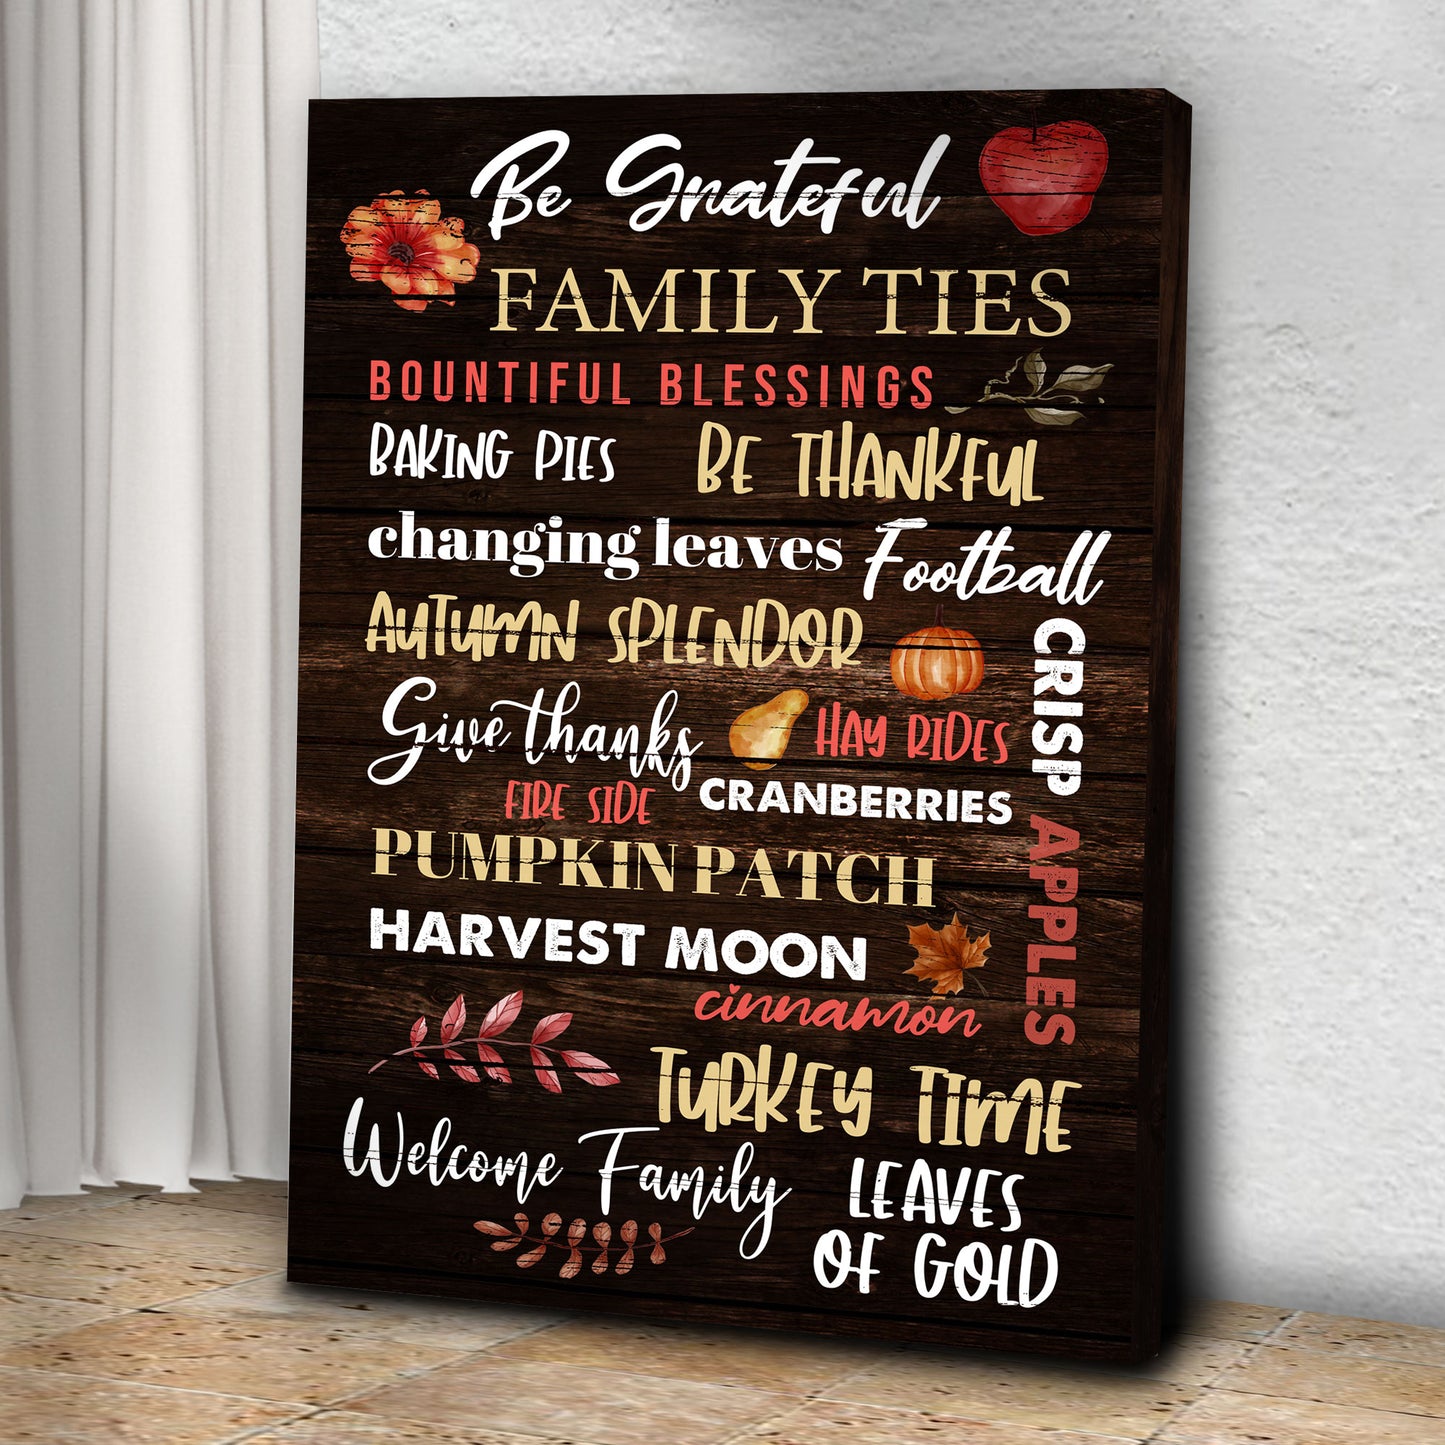 Be Grateful Bountiful Blessings Sign Style 1 - Image by Tailored Canvases